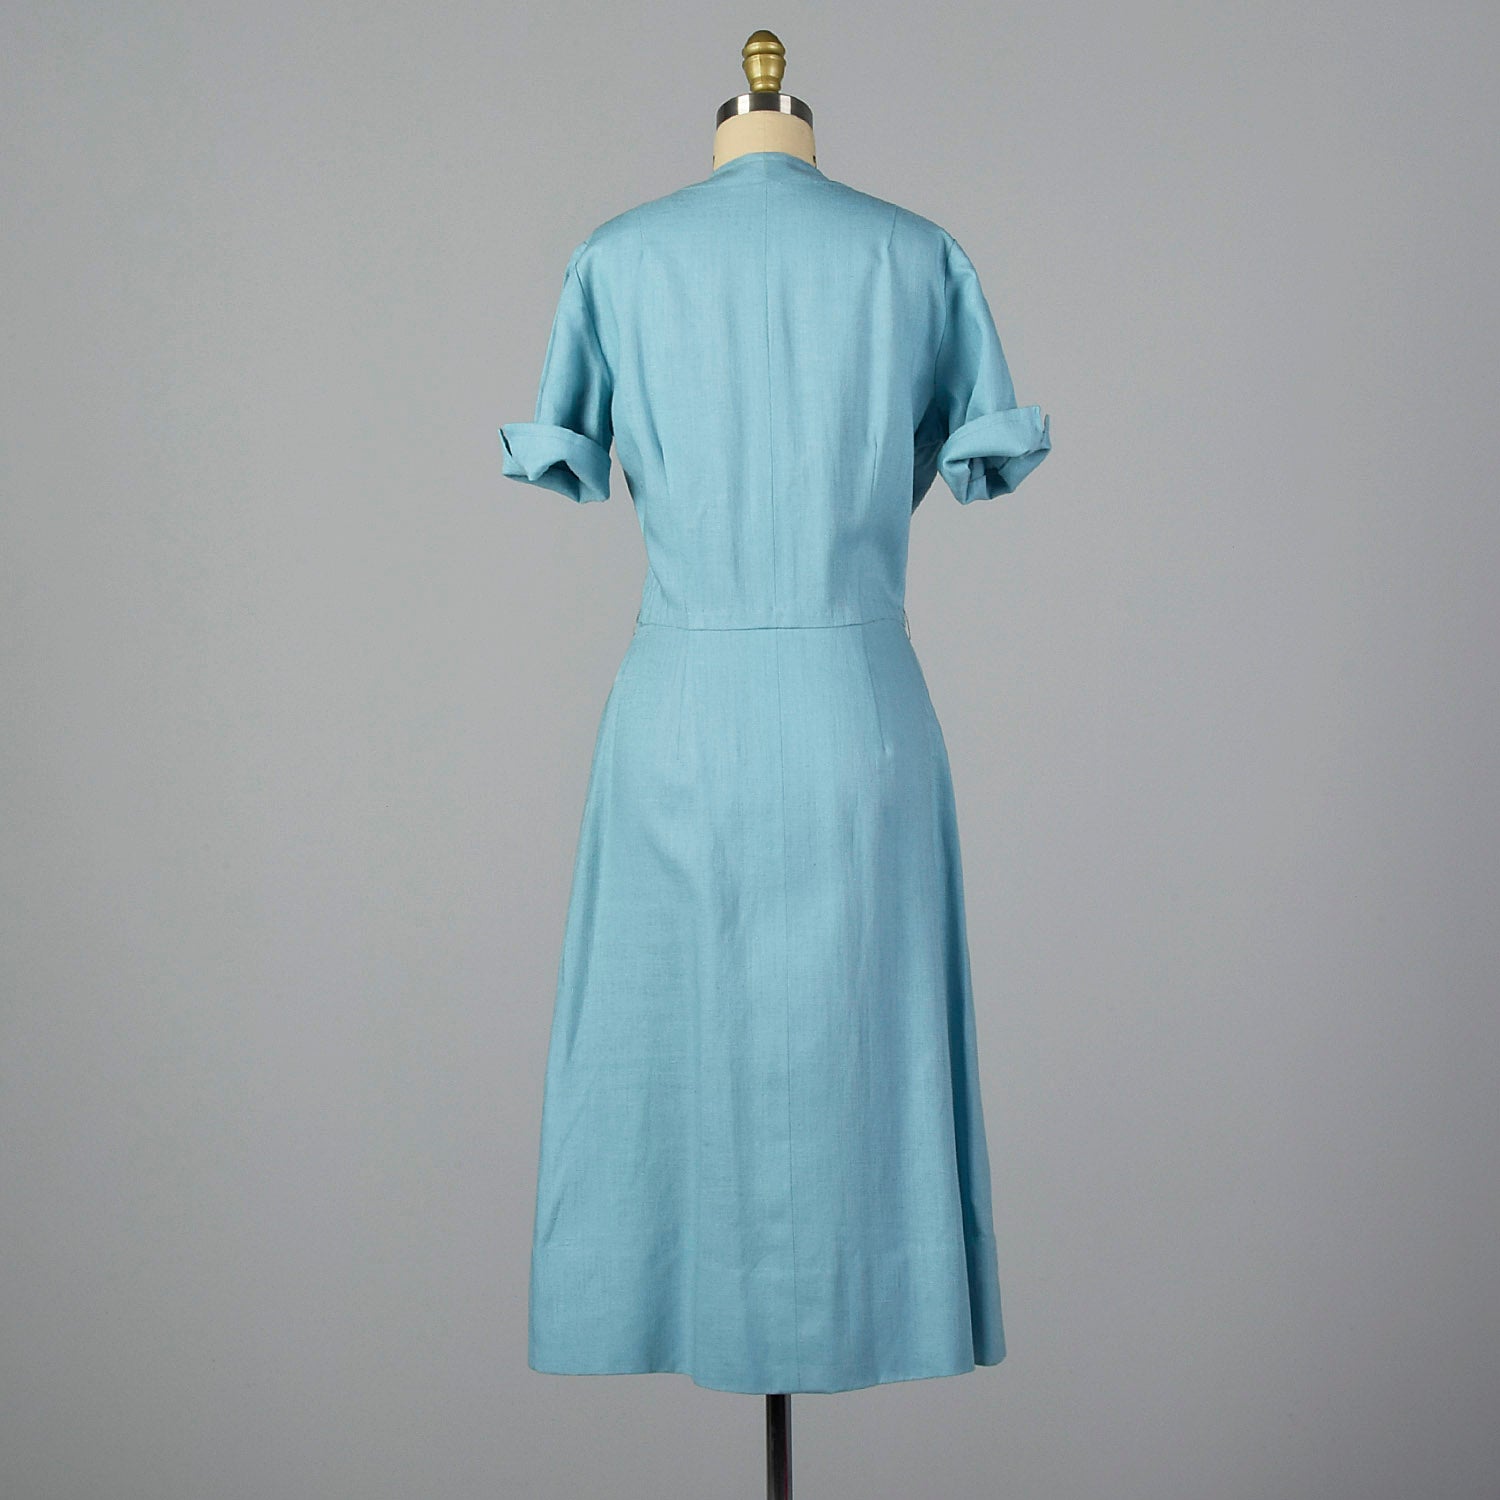 Medium 1940s Linen Day Dress with Button Front